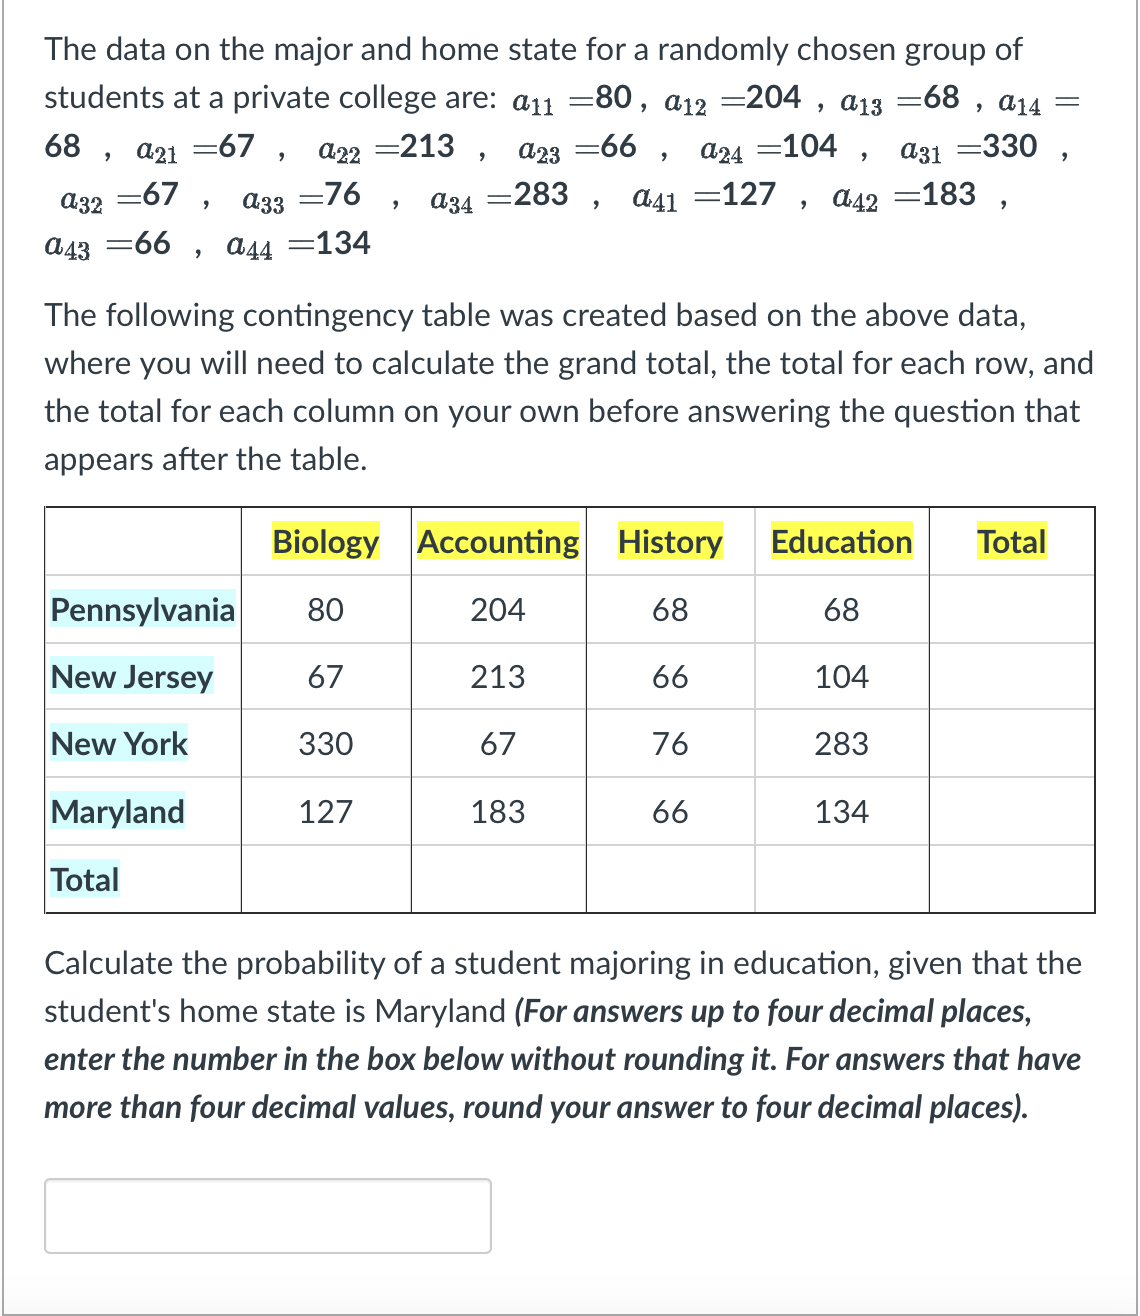 The data on the major and home state for a randomly chosen group of
students at a private college are: a11 =80, a12 =204, a13 -68, a₁4 =
68, q21 =67, a22 =213, α23=66, α24 =104, α31 =330,
a34 =283, a41 =127, a42=183,
=67,
=76,
a32
a33
a4366, α44 =134
The following contingency table was created based on the above data,
where you will need to calculate the grand total, the total for each row, and
the total for each column on your own before answering the question that
appears after the table.
Biology
Pennsylvania 80
New Jersey
67
New York
330
127
Maryland
Total
Accounting
204
213
67
183
History
68
66
76
66
Education Total
68
104
283
134
Calculate the probability of a student majoring in education, given that the
student's home state is Maryland (For answers up to four decimal places,
enter the number in the box below without rounding it. For answers that have
more than four decimal values, round your answer to four decimal places).